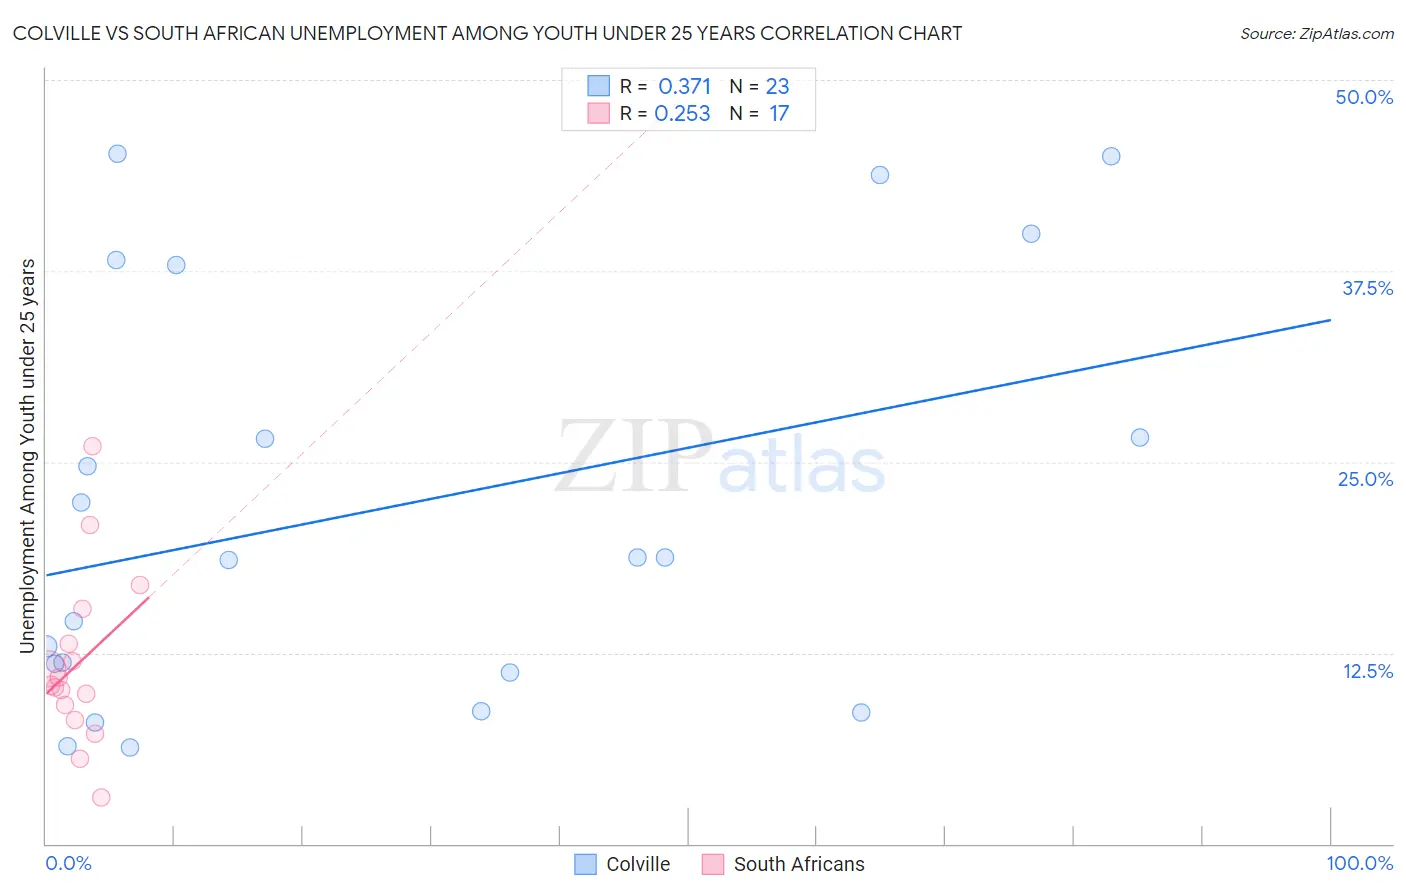 Colville vs South African Unemployment Among Youth under 25 years